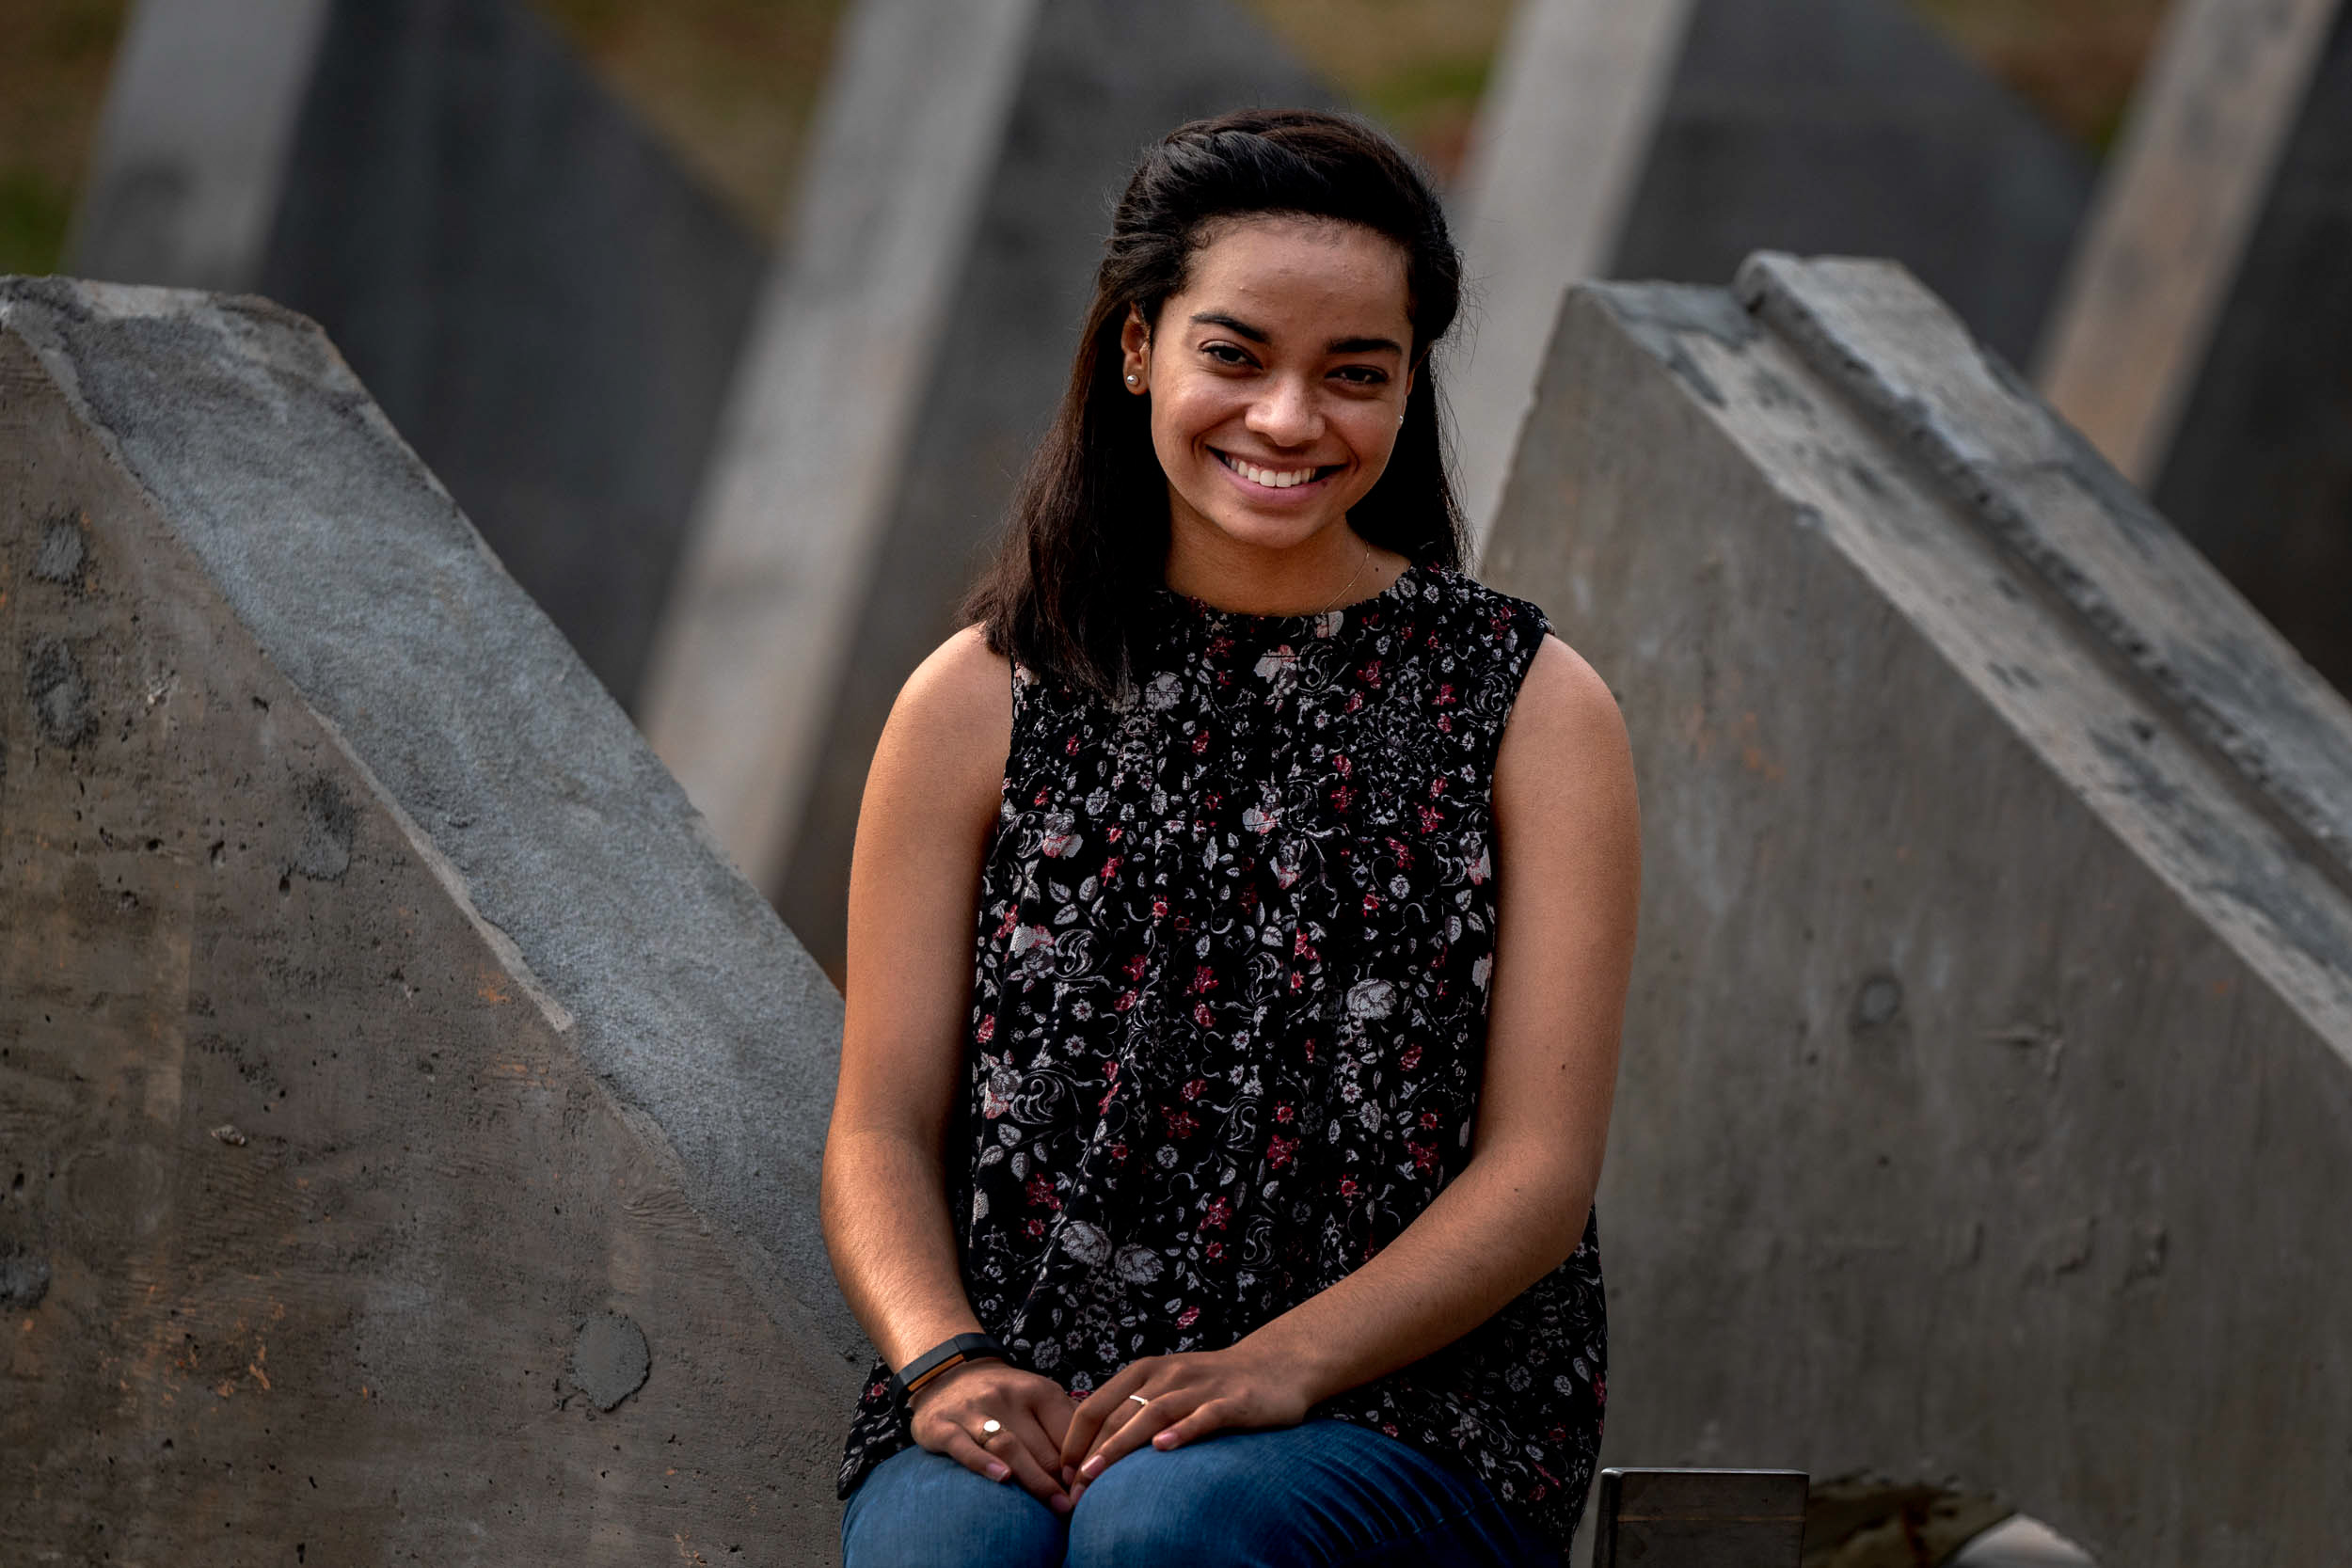 UVA student Jessica Harris: “As someone who proudly gets to wear both town and gown, I believe I have a certain responsibility in working to ensure thoughtful relationships and interactions between the two.” 